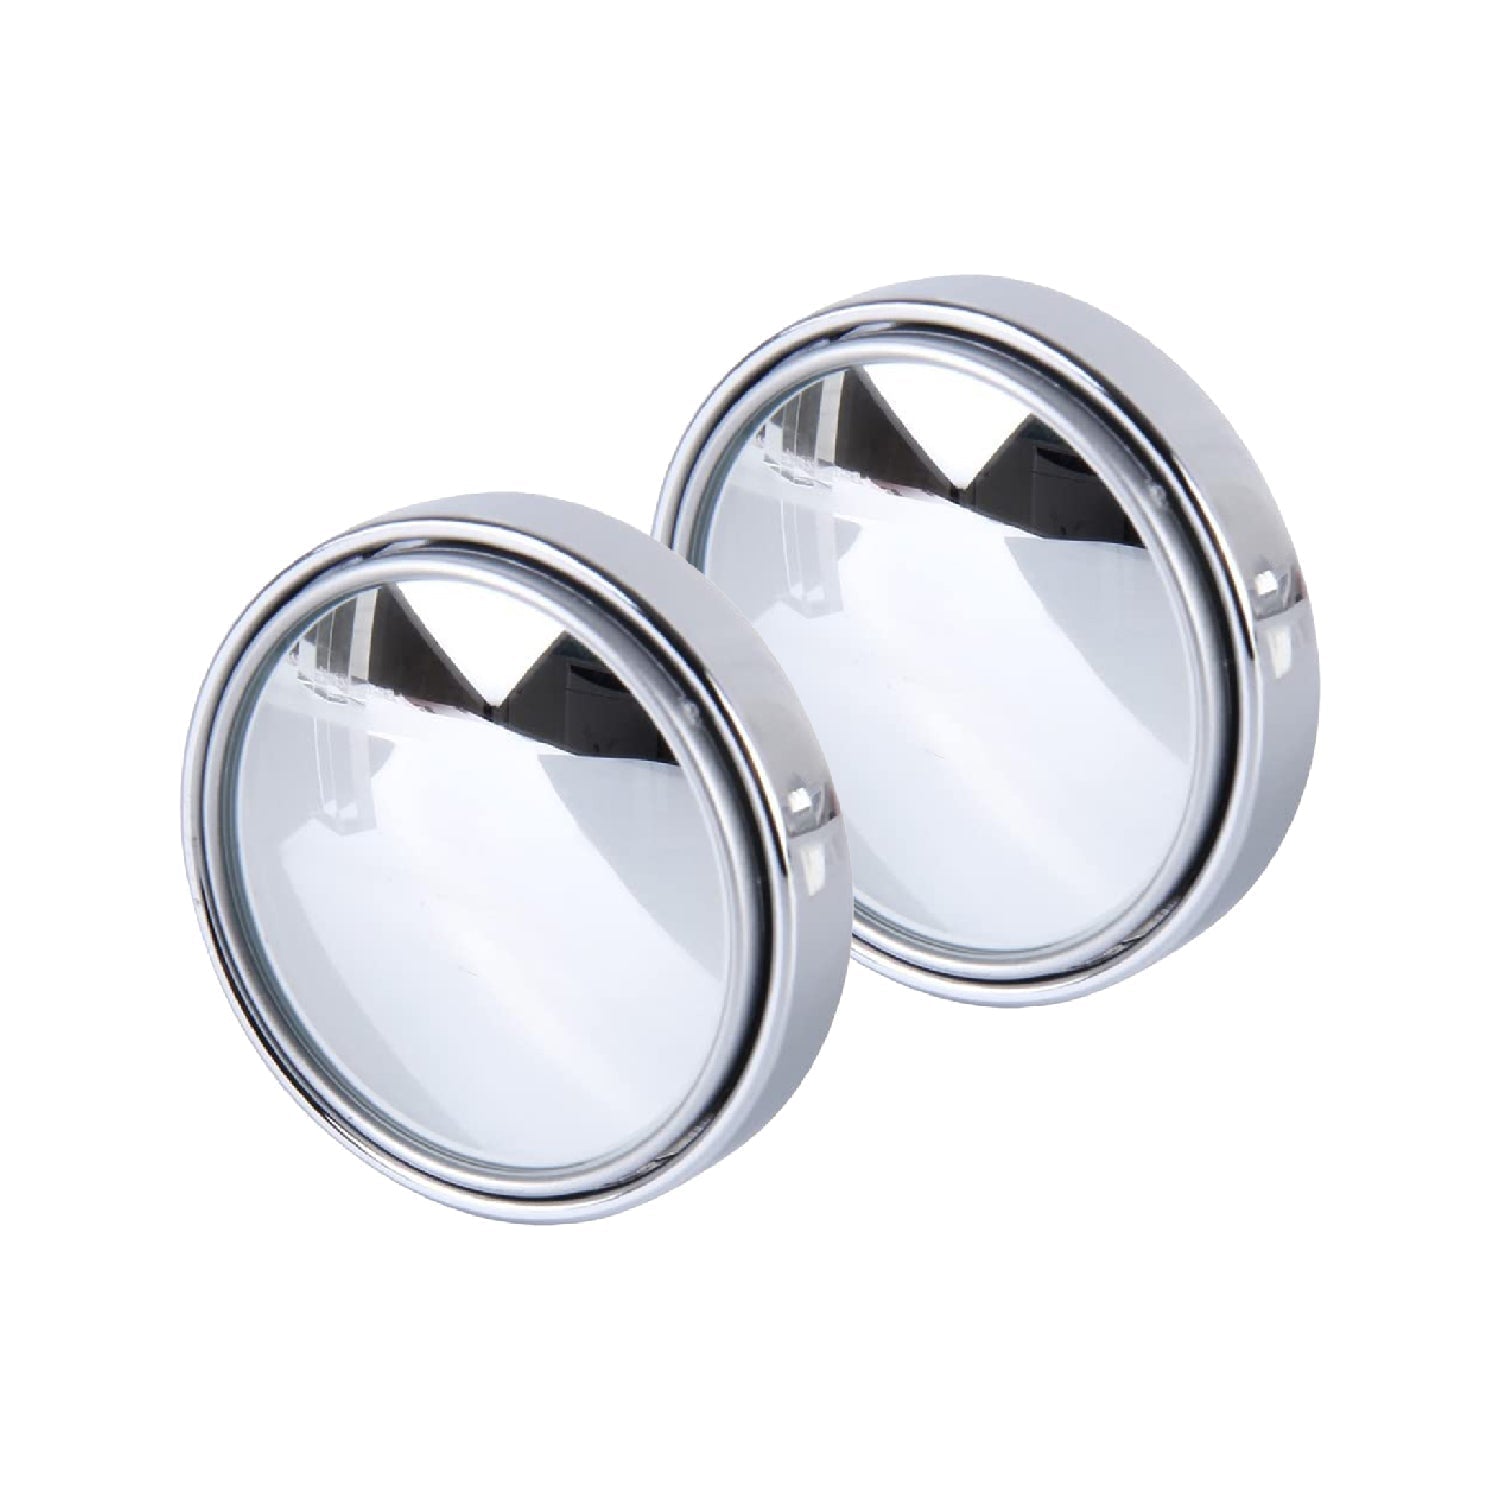 6205 360DEGREE BLIND SPOT ROUND WIDE ANGLE ADJUSTABLE CONVEX REAR VIEW MIRROR - PACK OF 2 